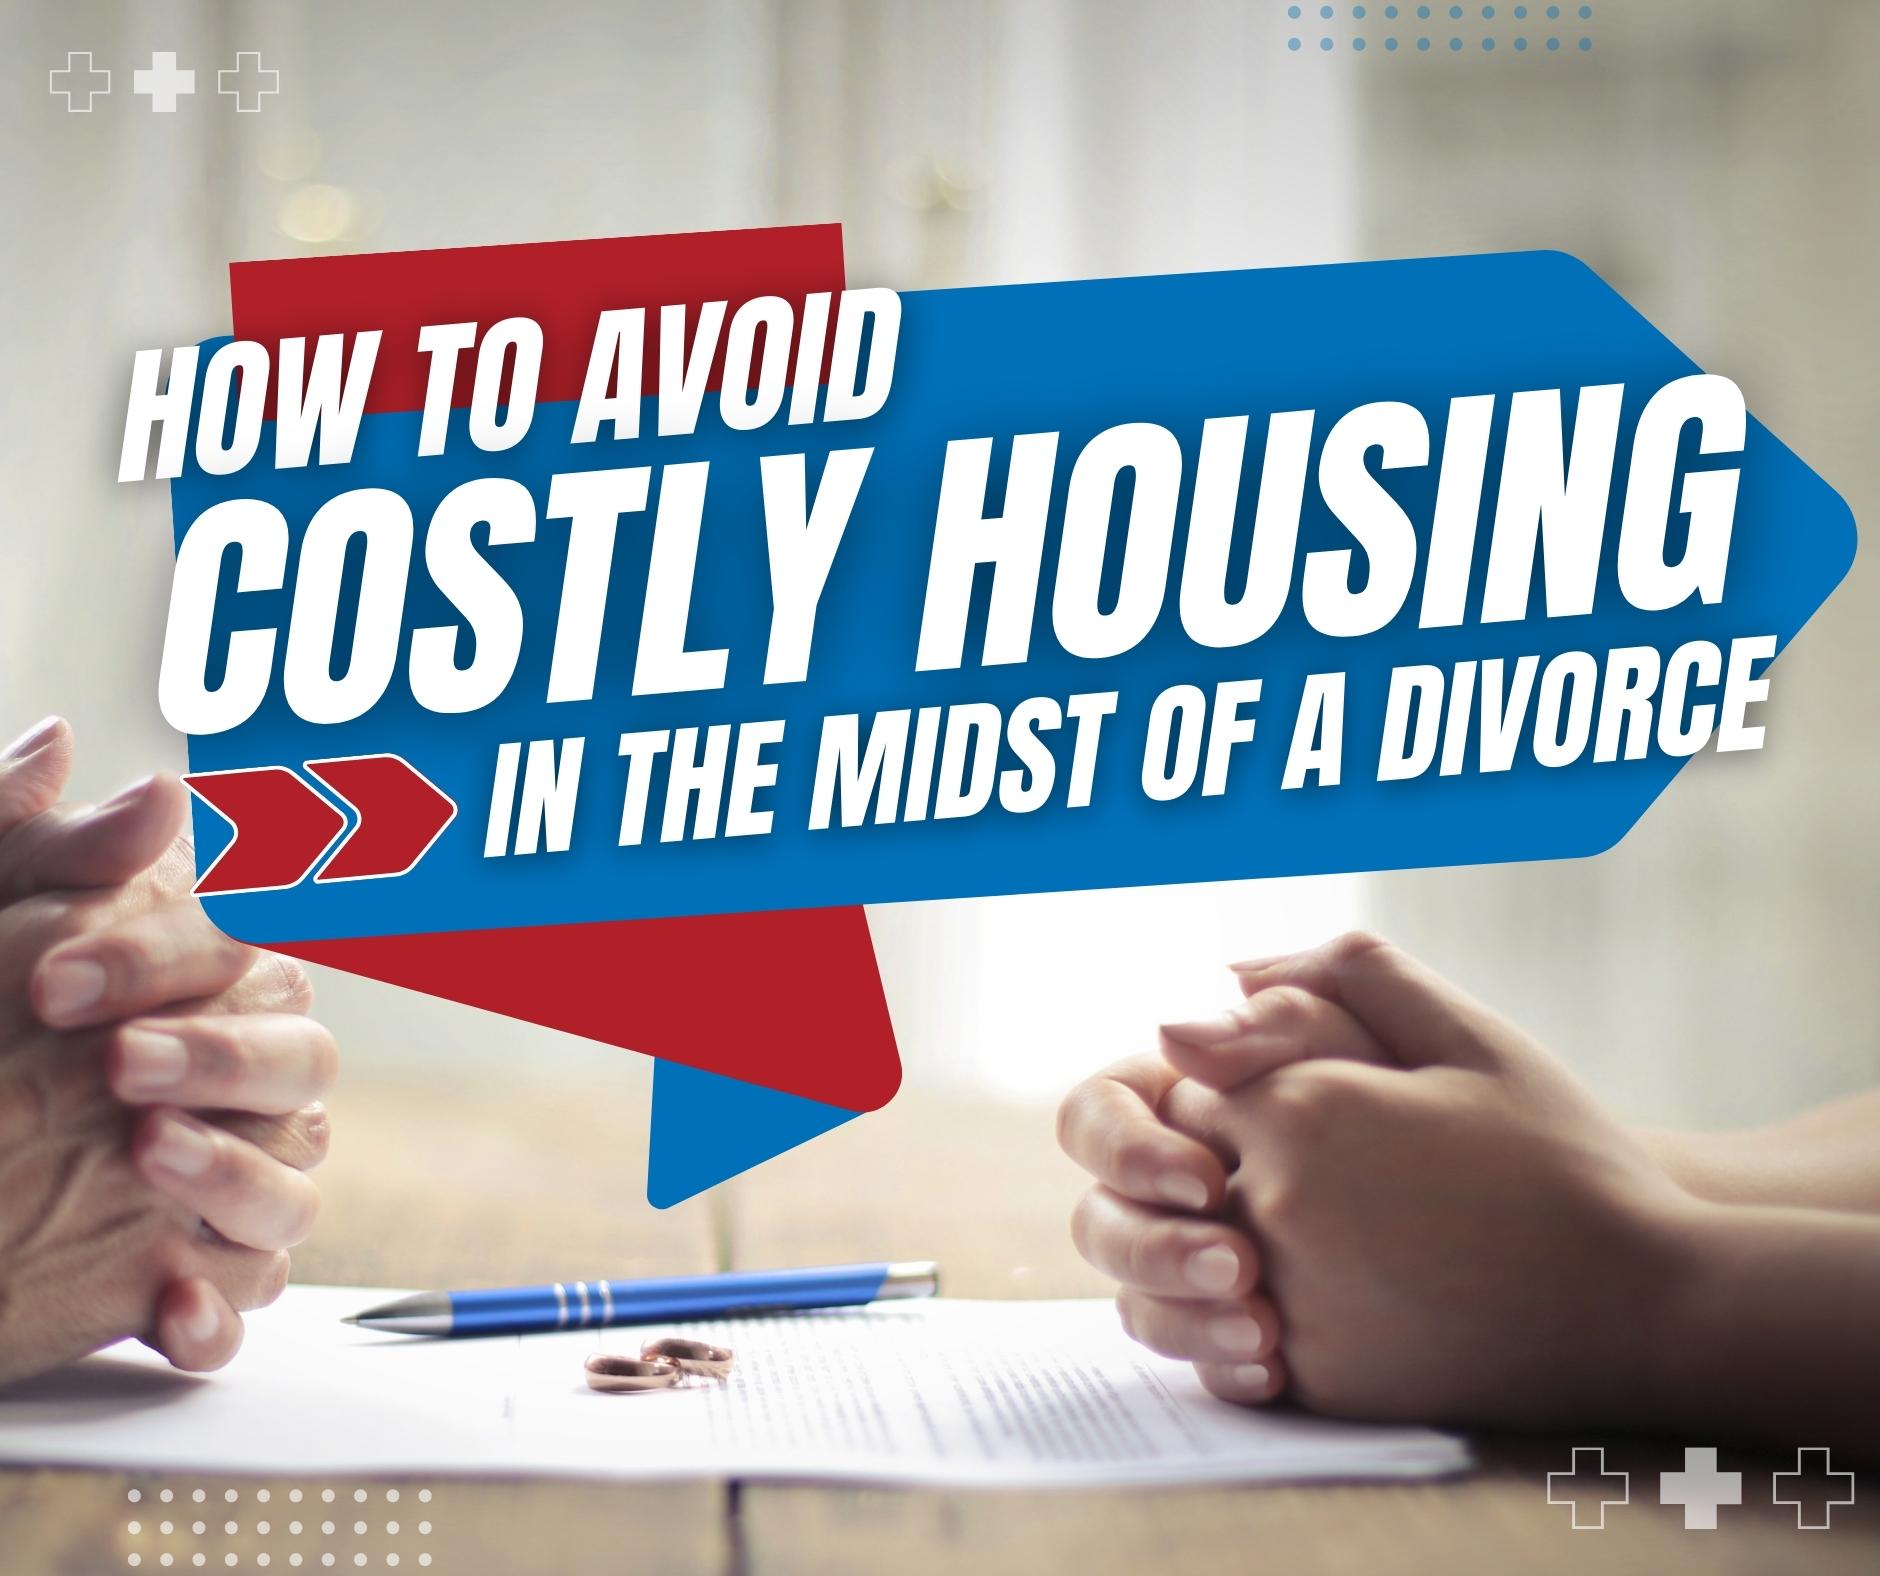 How To Avoid Costly Housing Mistakes In The Midst Of A Divorce